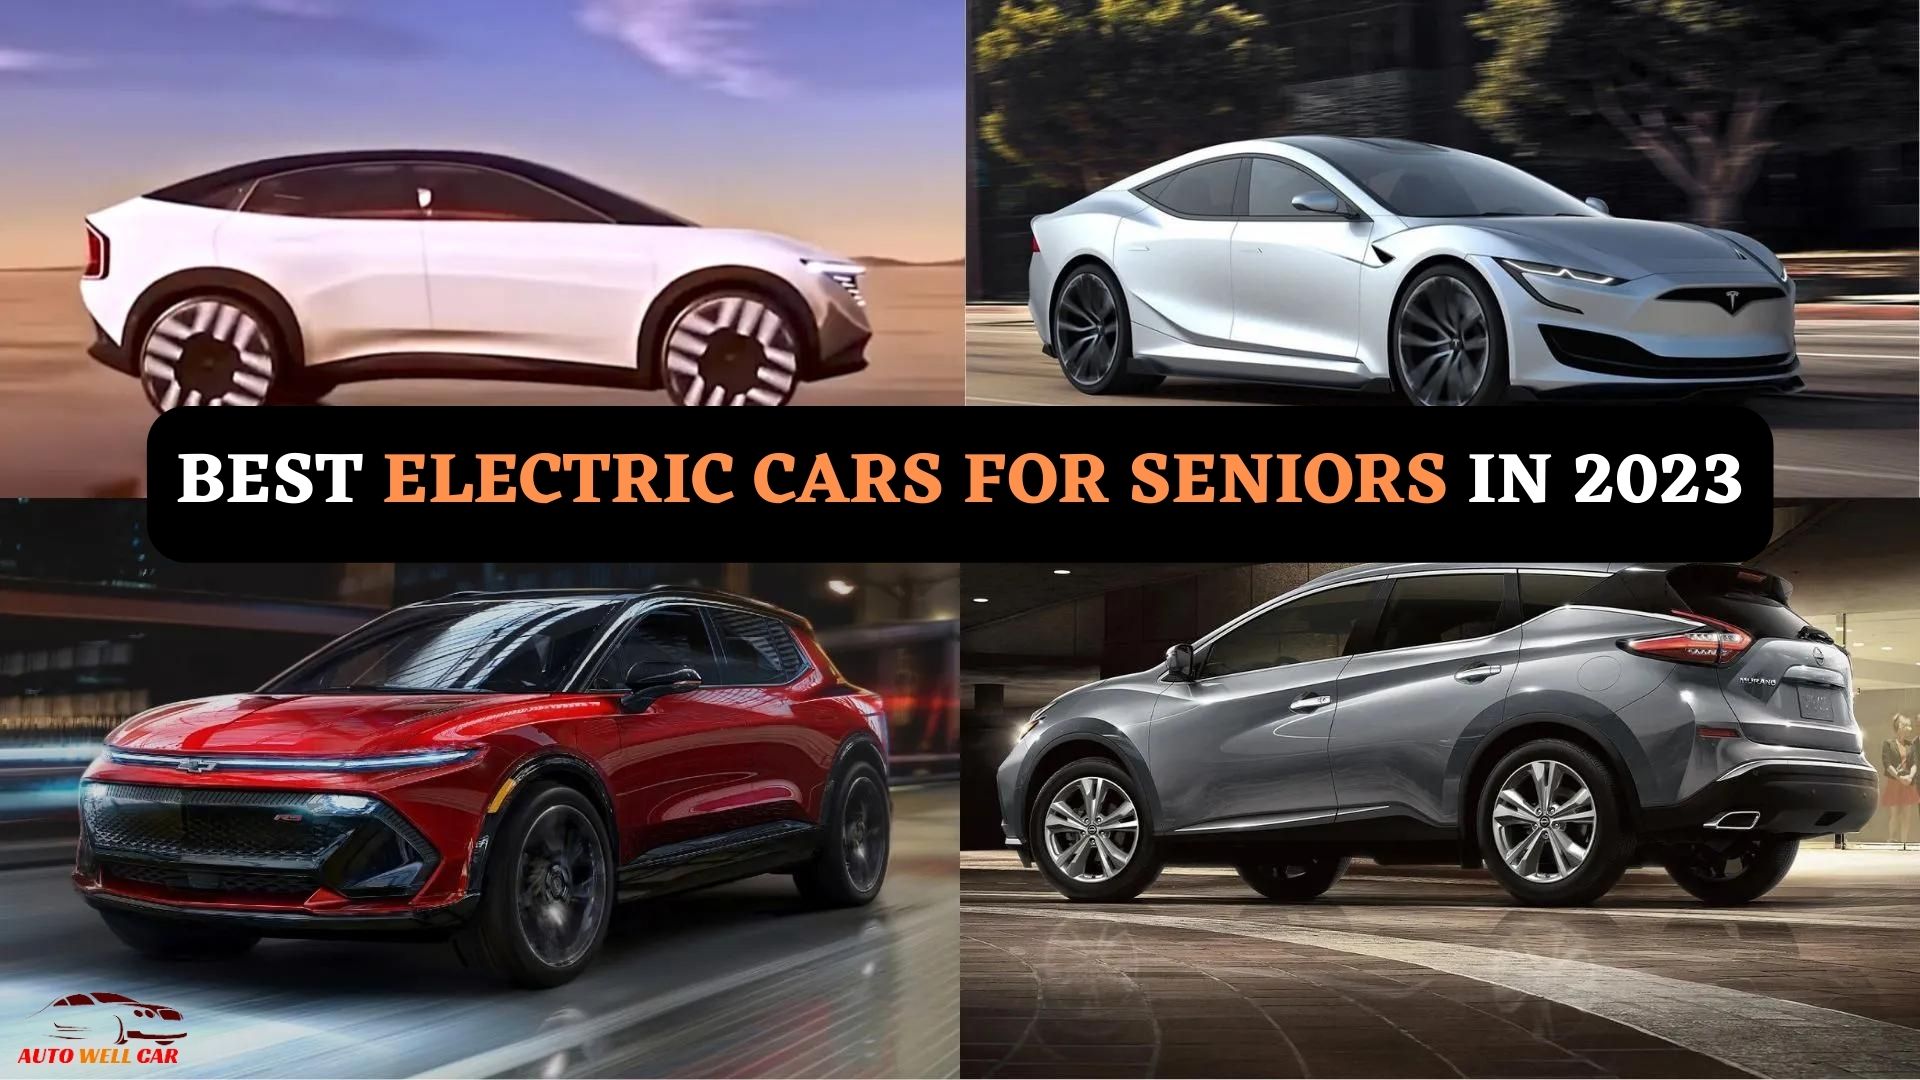 Top 7 of The Best Electric Cars for Seniors in 2023